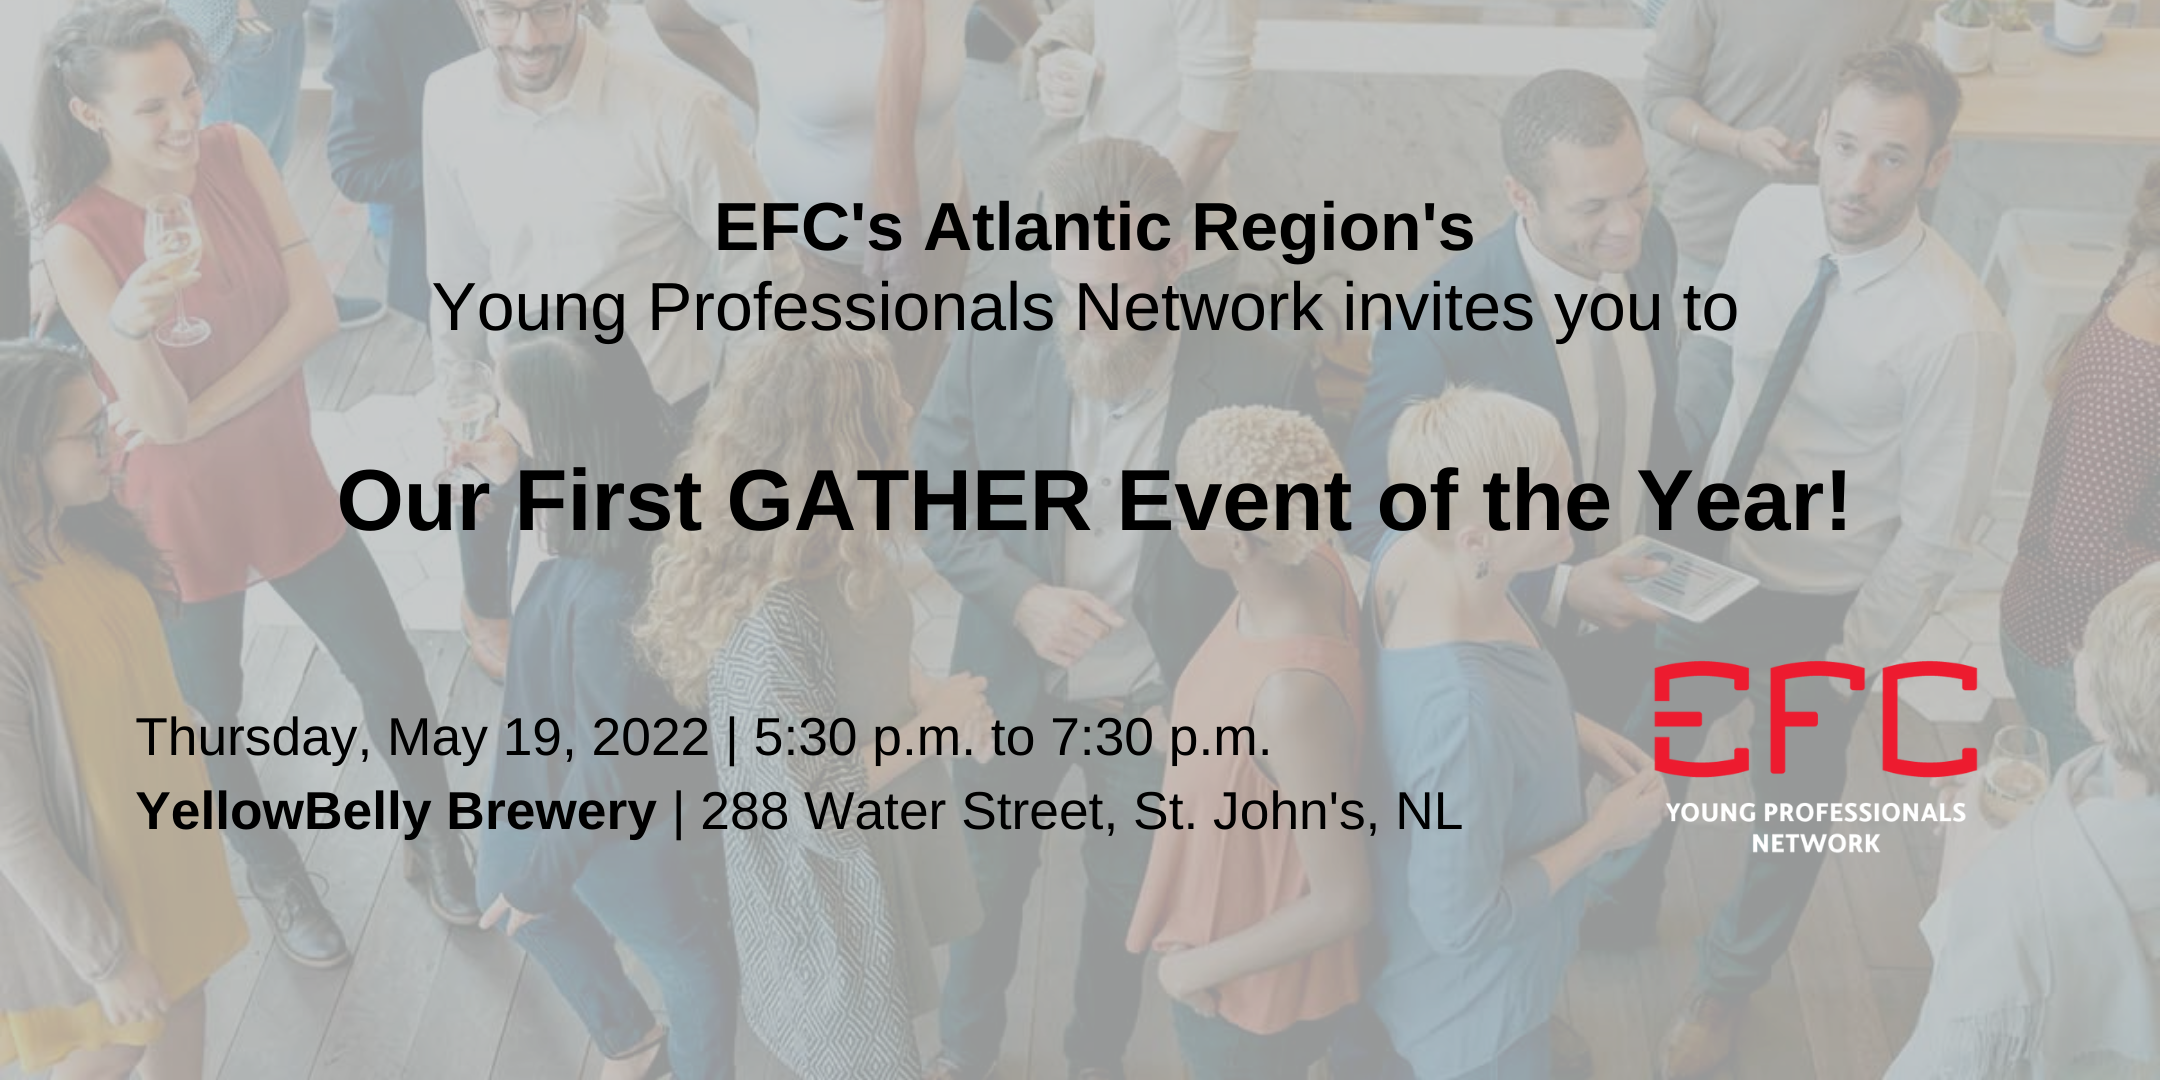 YPN Atlantic Region GATHER event Thursday, May 19, 2022 530 p.m. to 730 p.m.